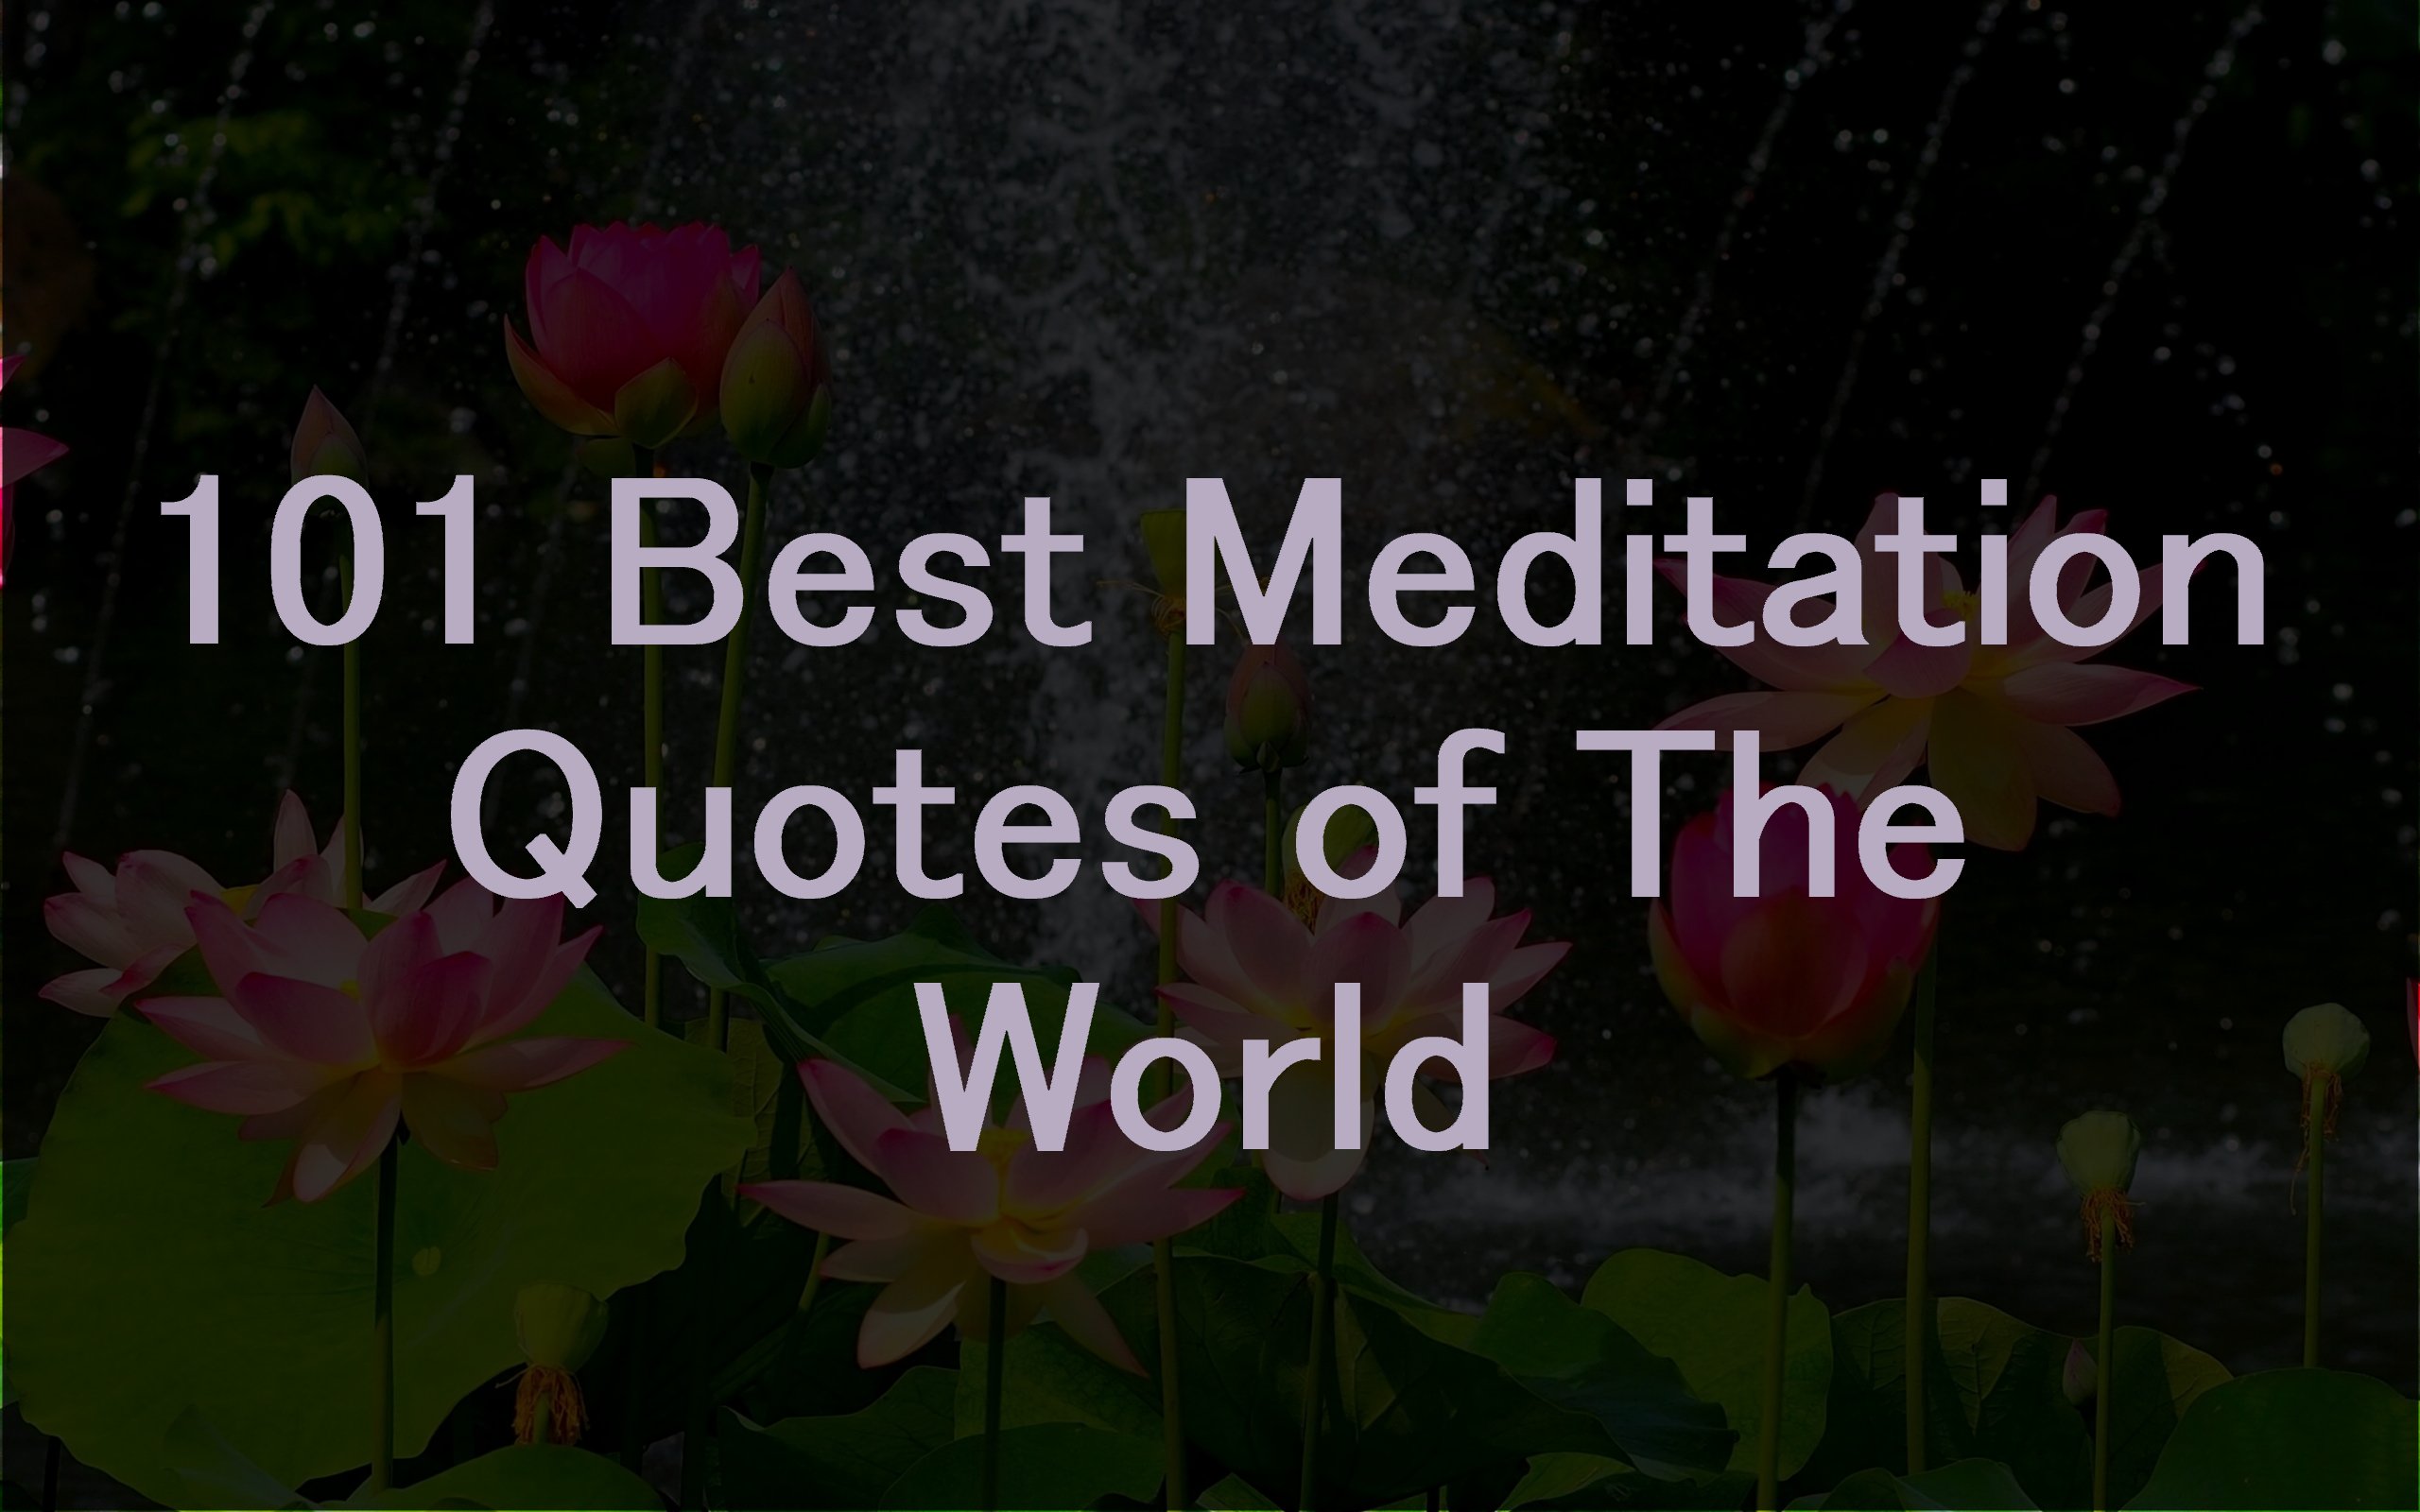 101 Best Meditation Quotes of The World